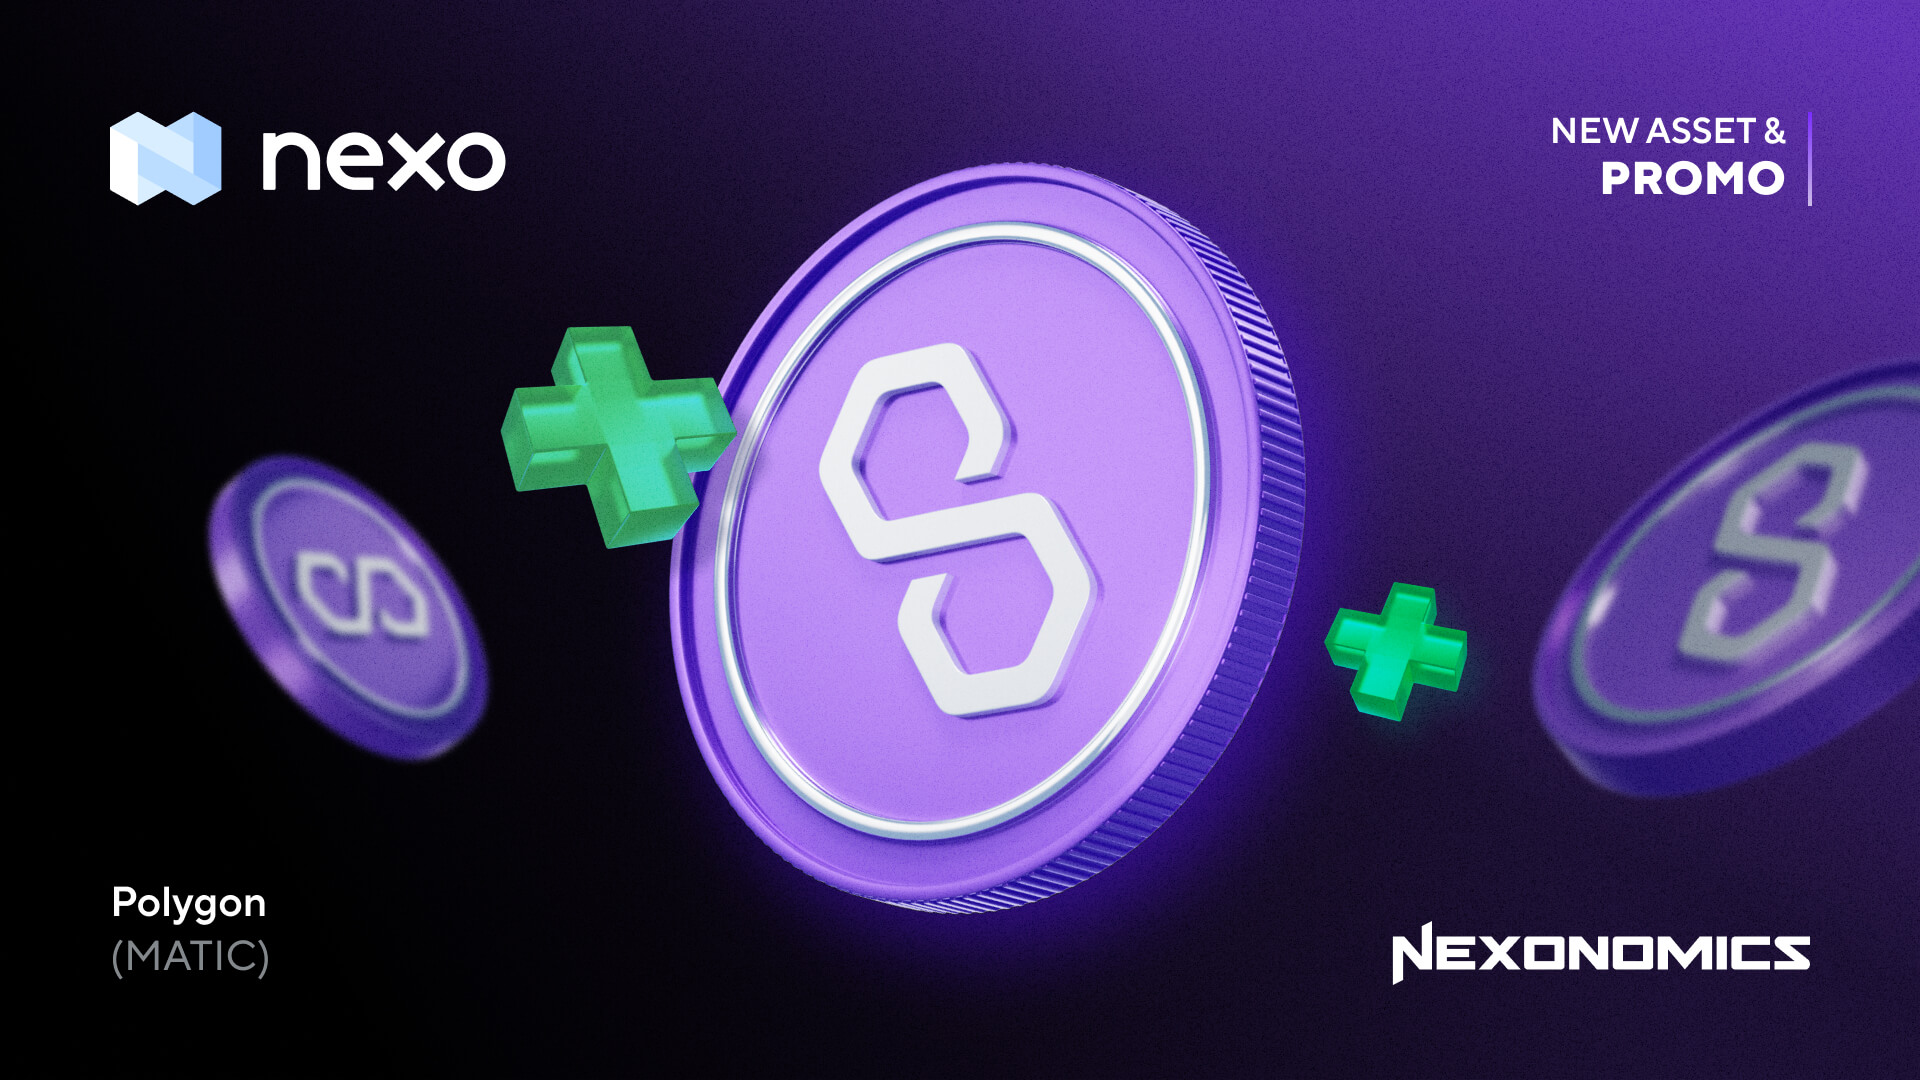 Polygon’s MATIC Is Joining Nexo: Get Up to 20% APR Until Jan 3